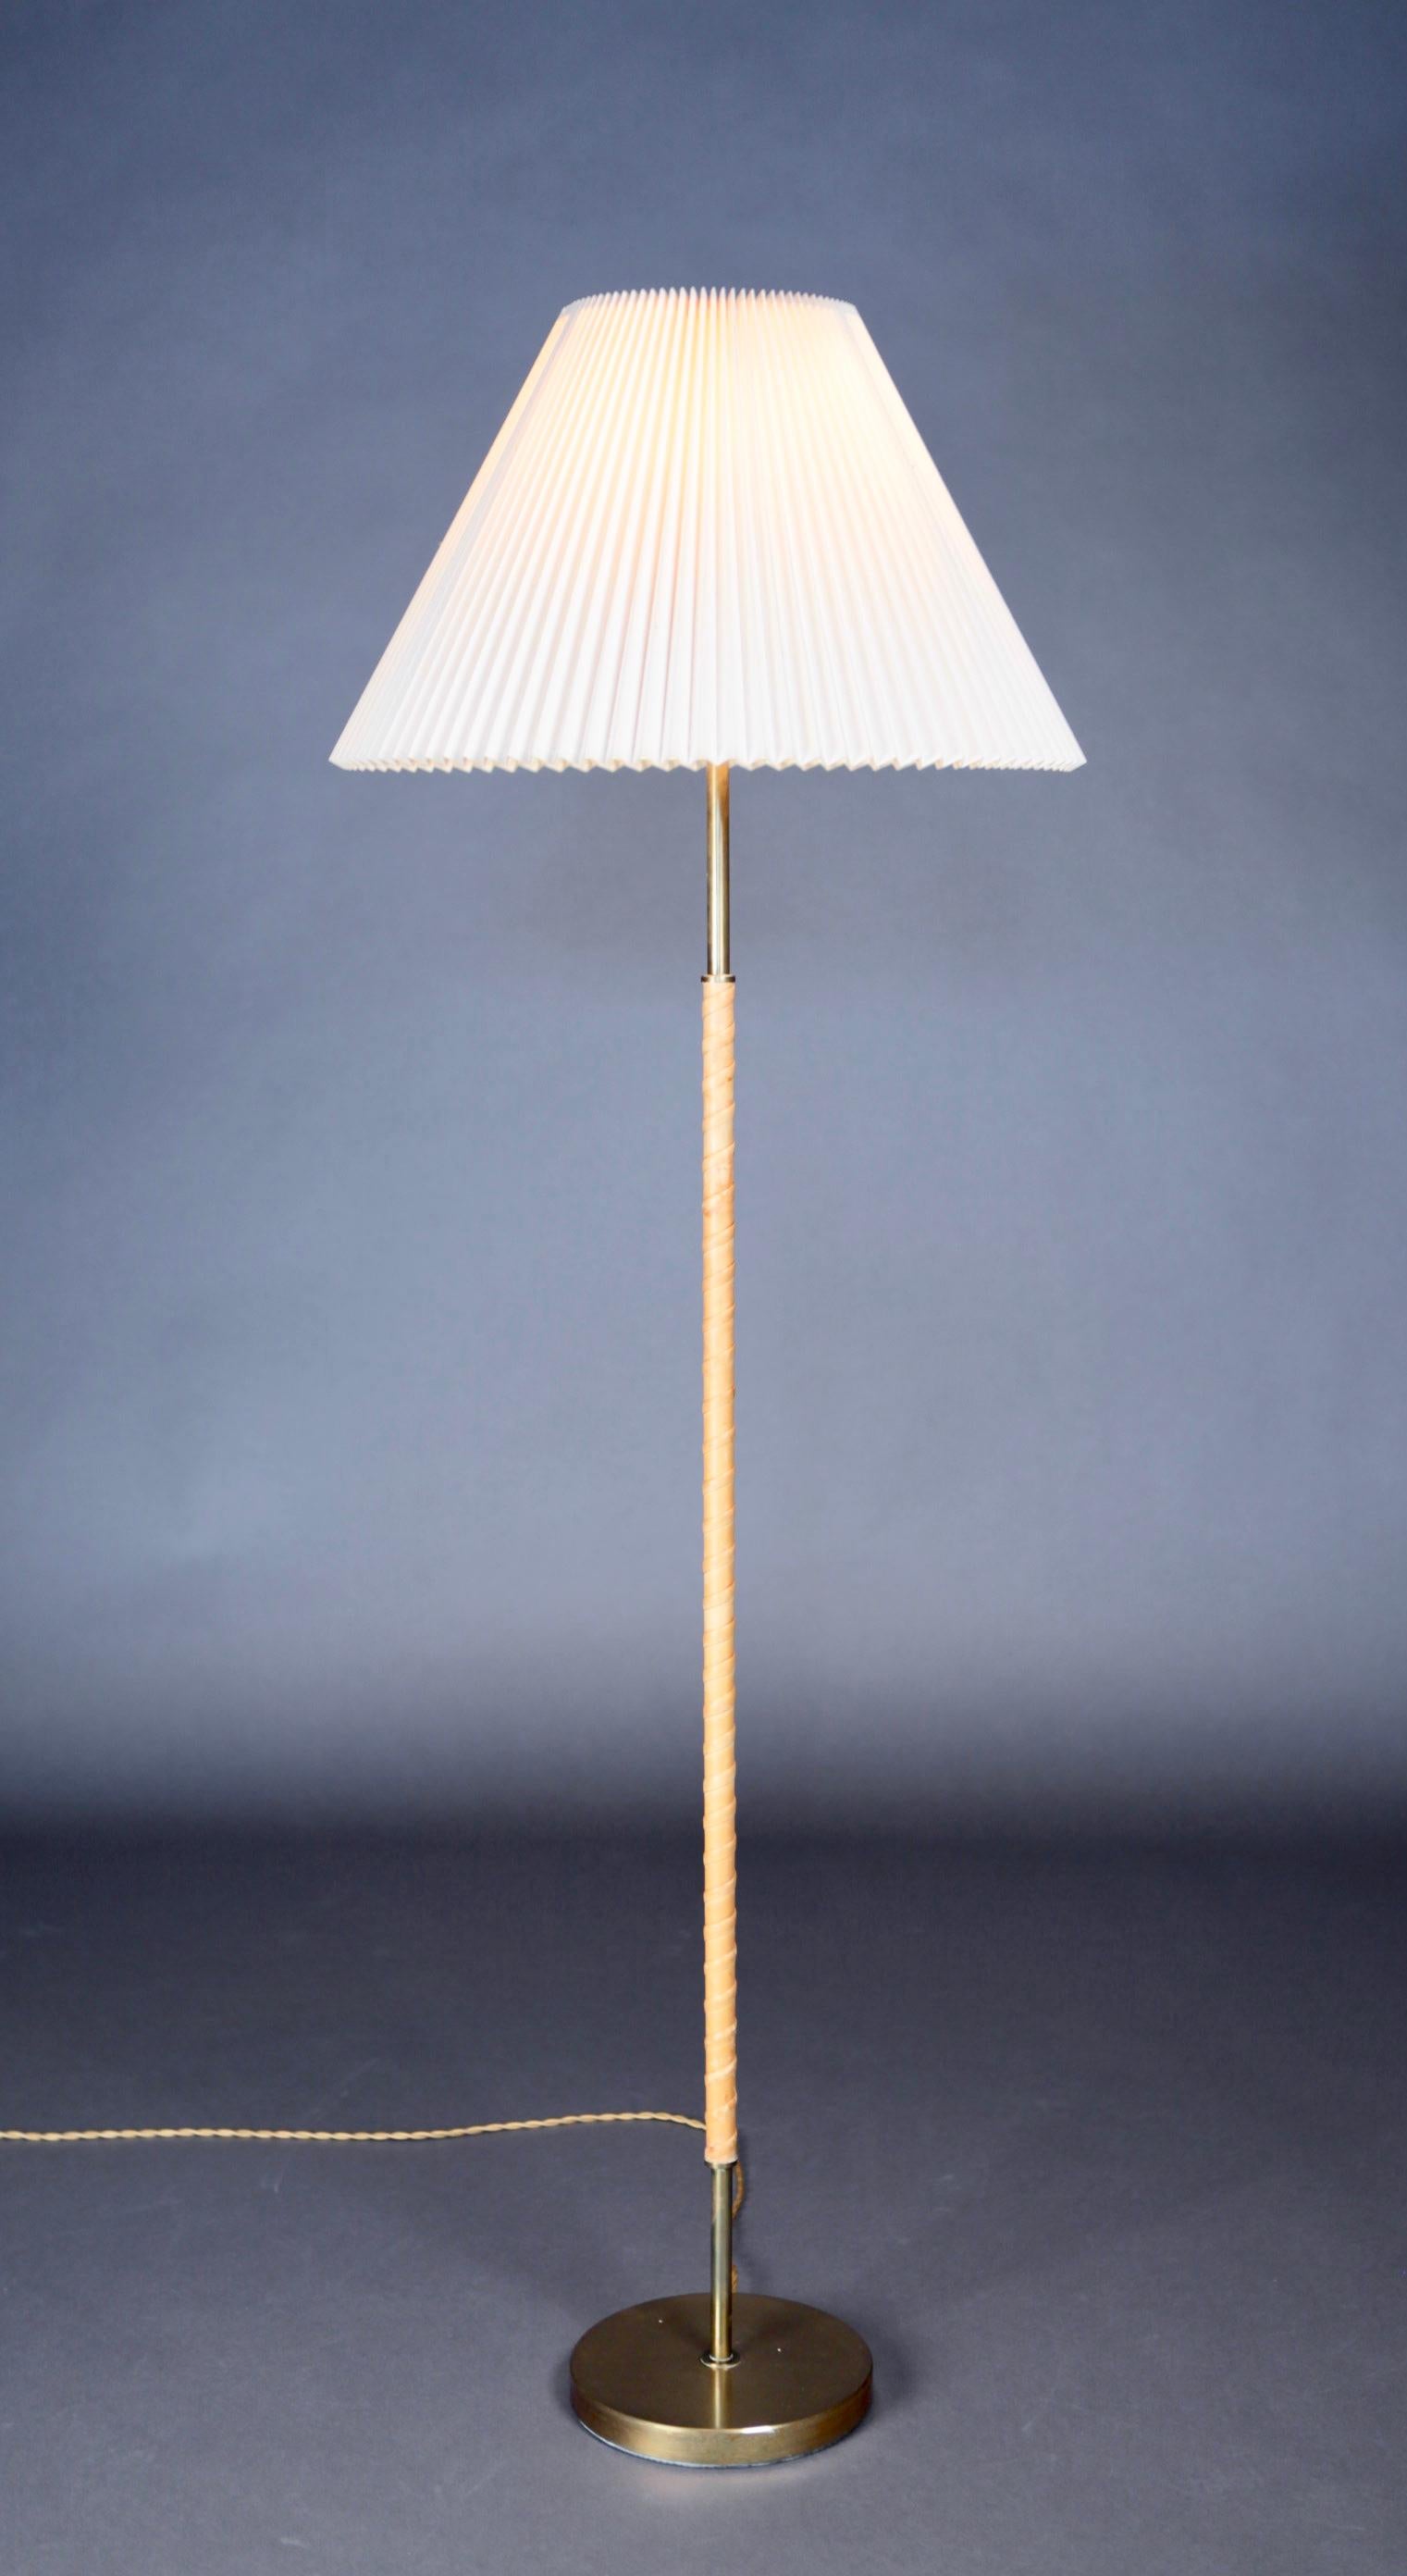 Leather and brass floor lamp by Harald Elof Notini for Böhlmarks, Sweden, 1940s.